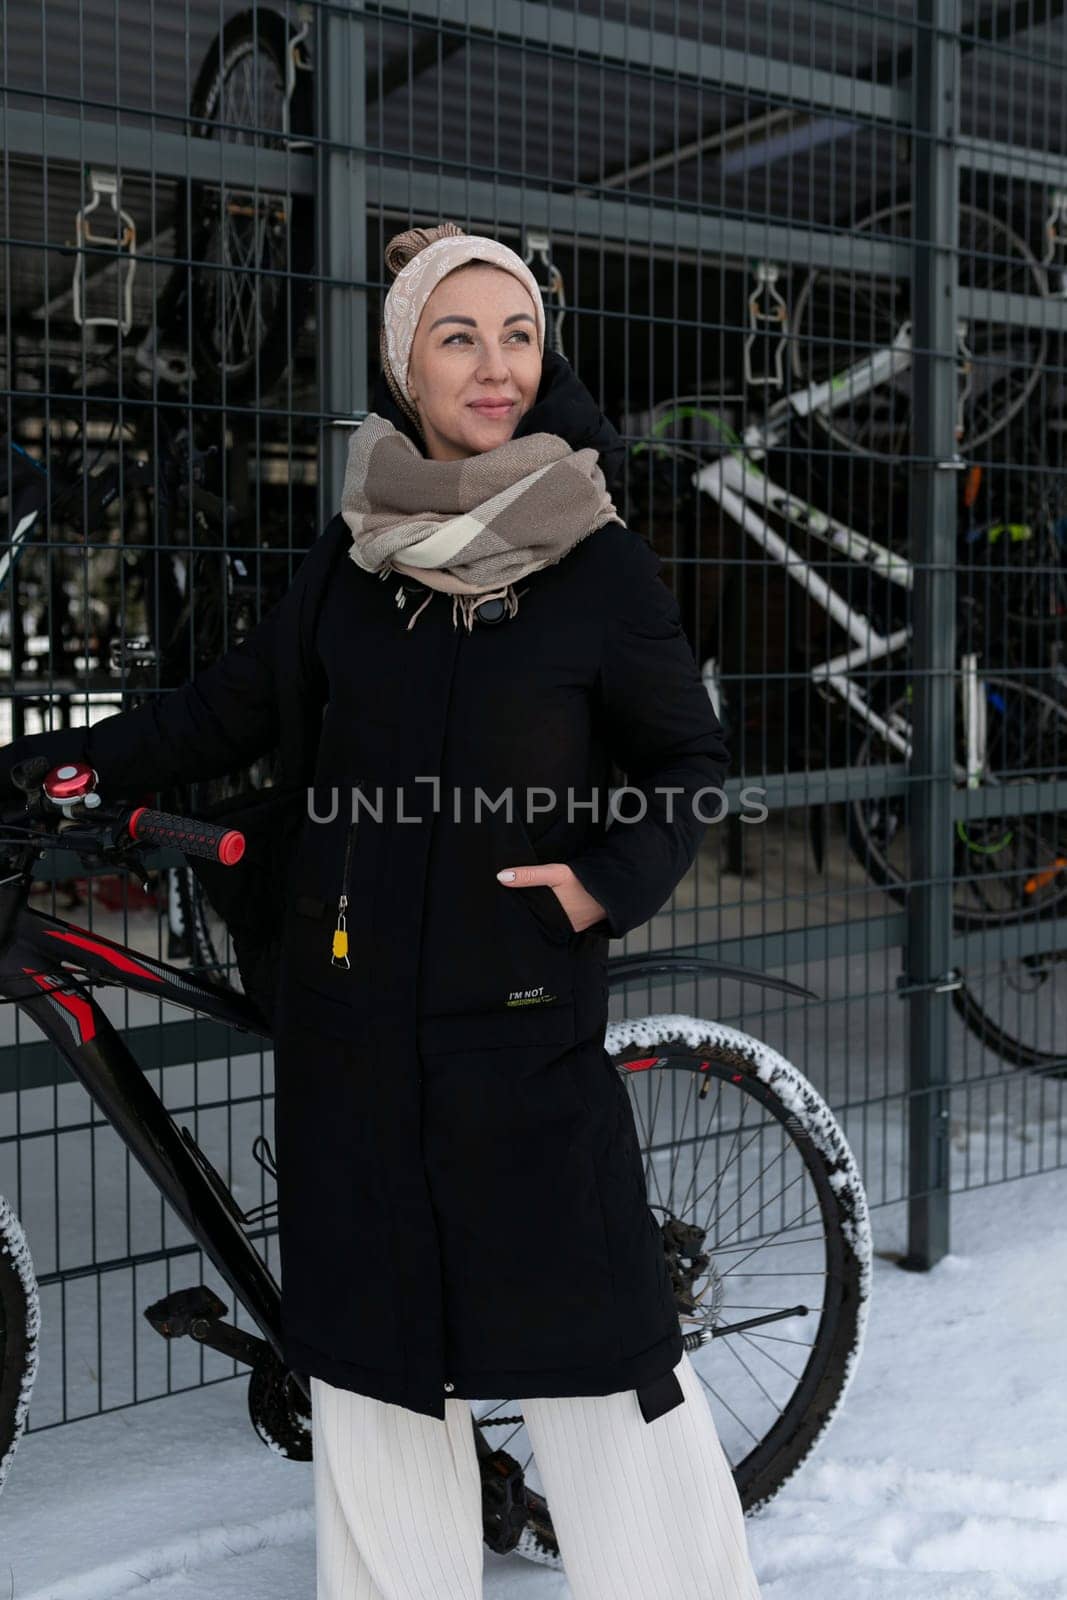 Smiling cute woman with blond dreadlocks rented a bicycle in winter.